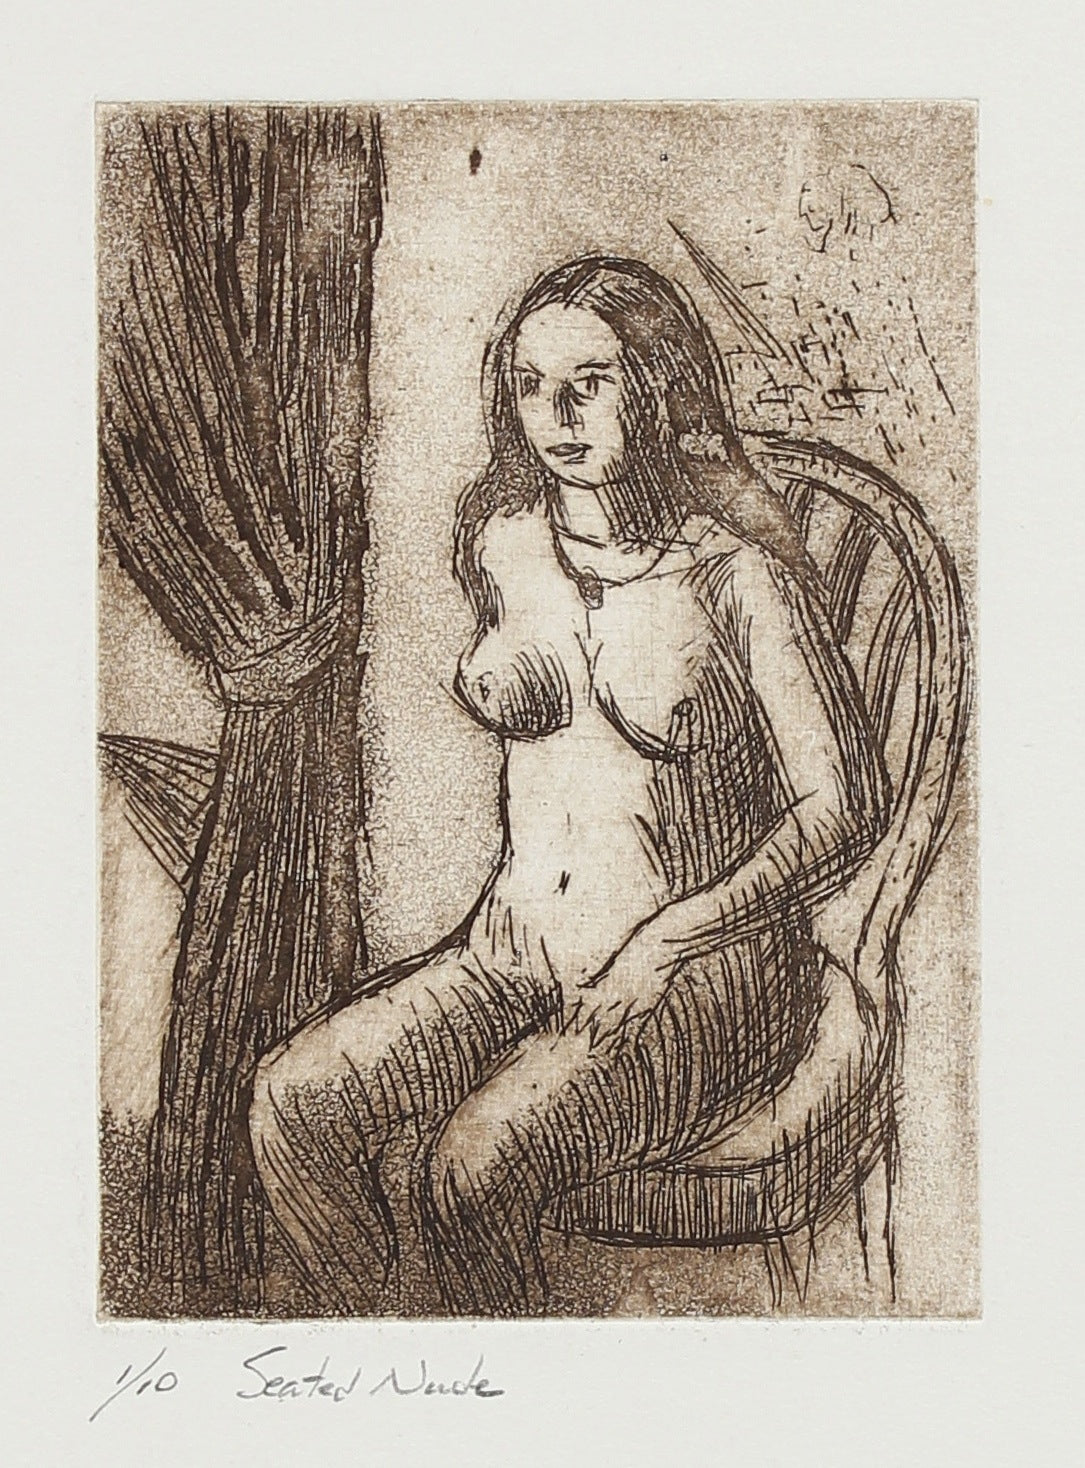 &lt;i&gt;Seated Nude&lt;/i&gt;&lt;br&gt;C. 1965 Etching&lt;br&gt;&lt;br&gt;#2166A